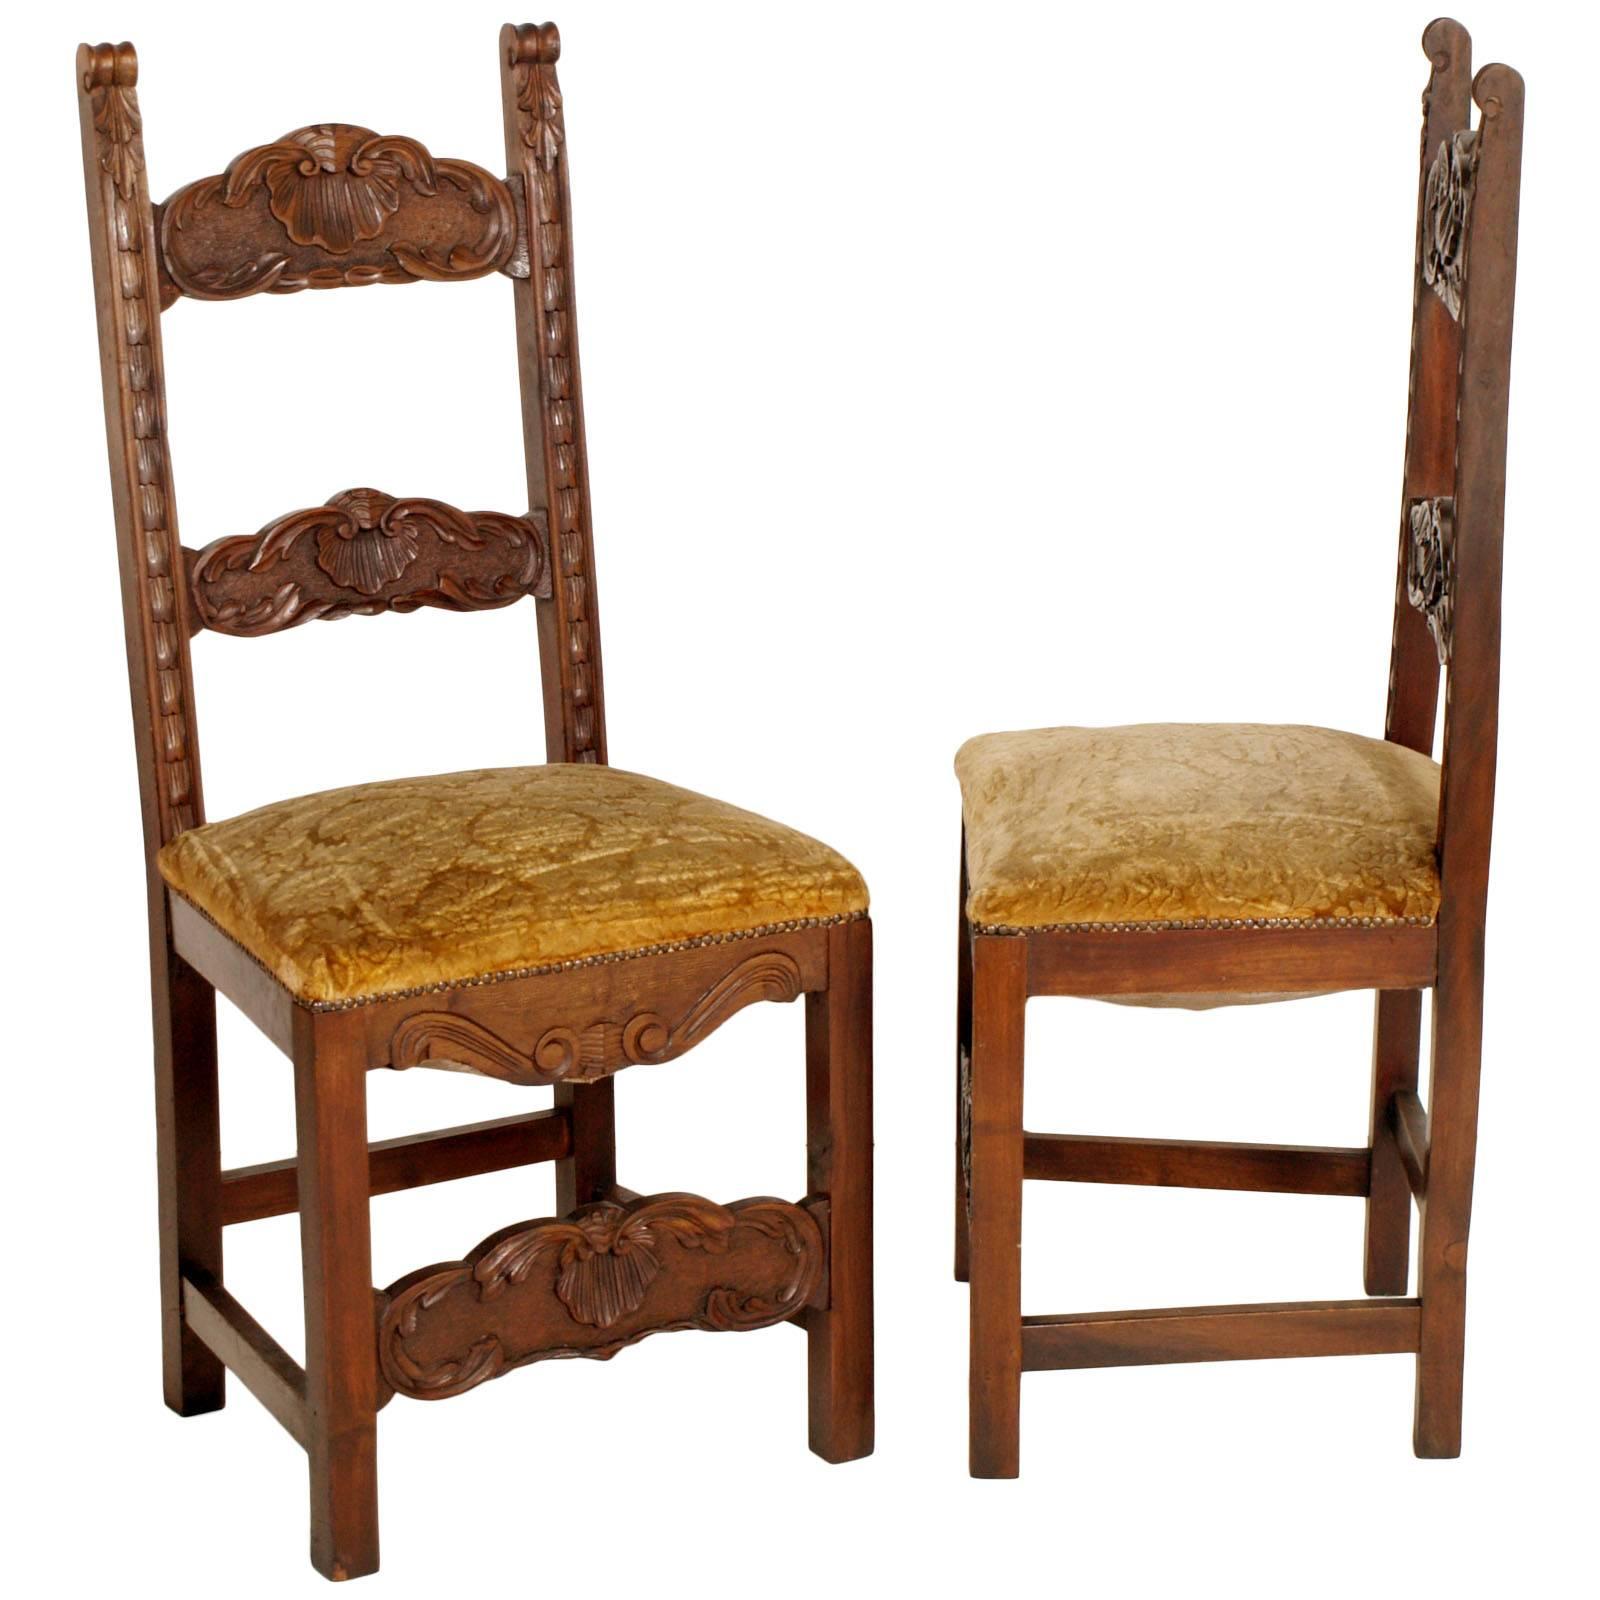 Late 19th century set six Renaissance chairs in hand-carved walnut, spring seat upholstered in ocher-colored velvet. The chairs are still usable. Their restoration with new upholstery, costs 900 US $.

Measures in cm: H 108/50, W 46, D 45.